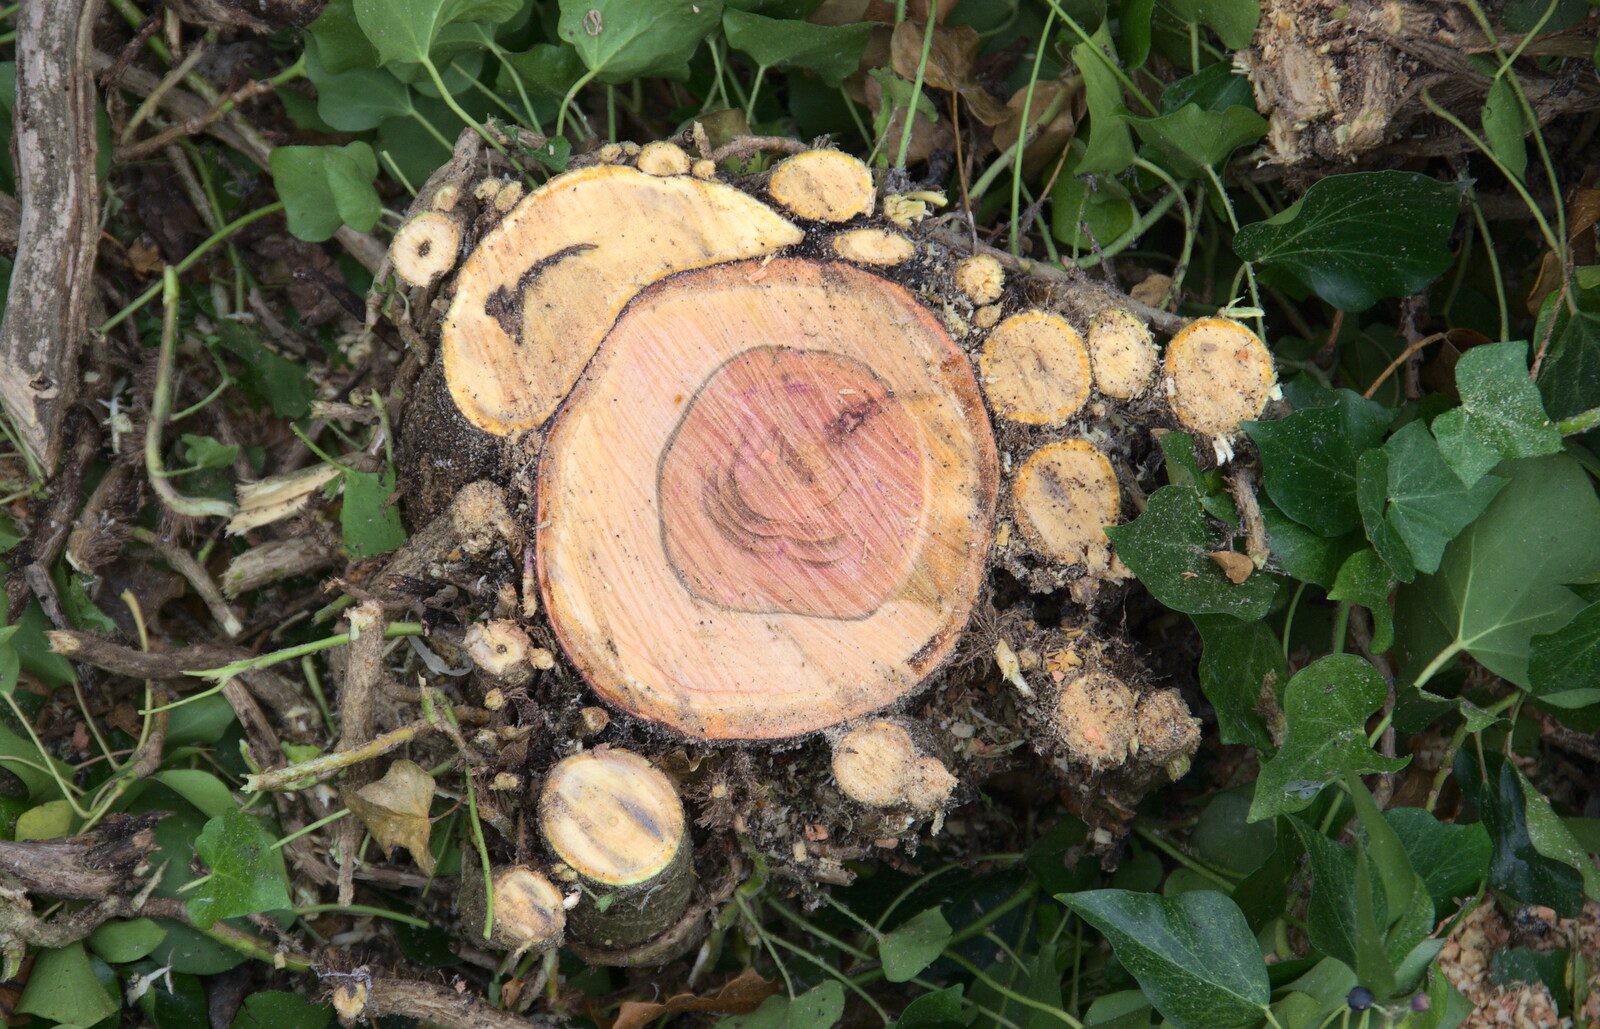 Tehre's a nice pattern in the sawn tree from New Year's Eve in Spreyton, Devon - 31st December 2017